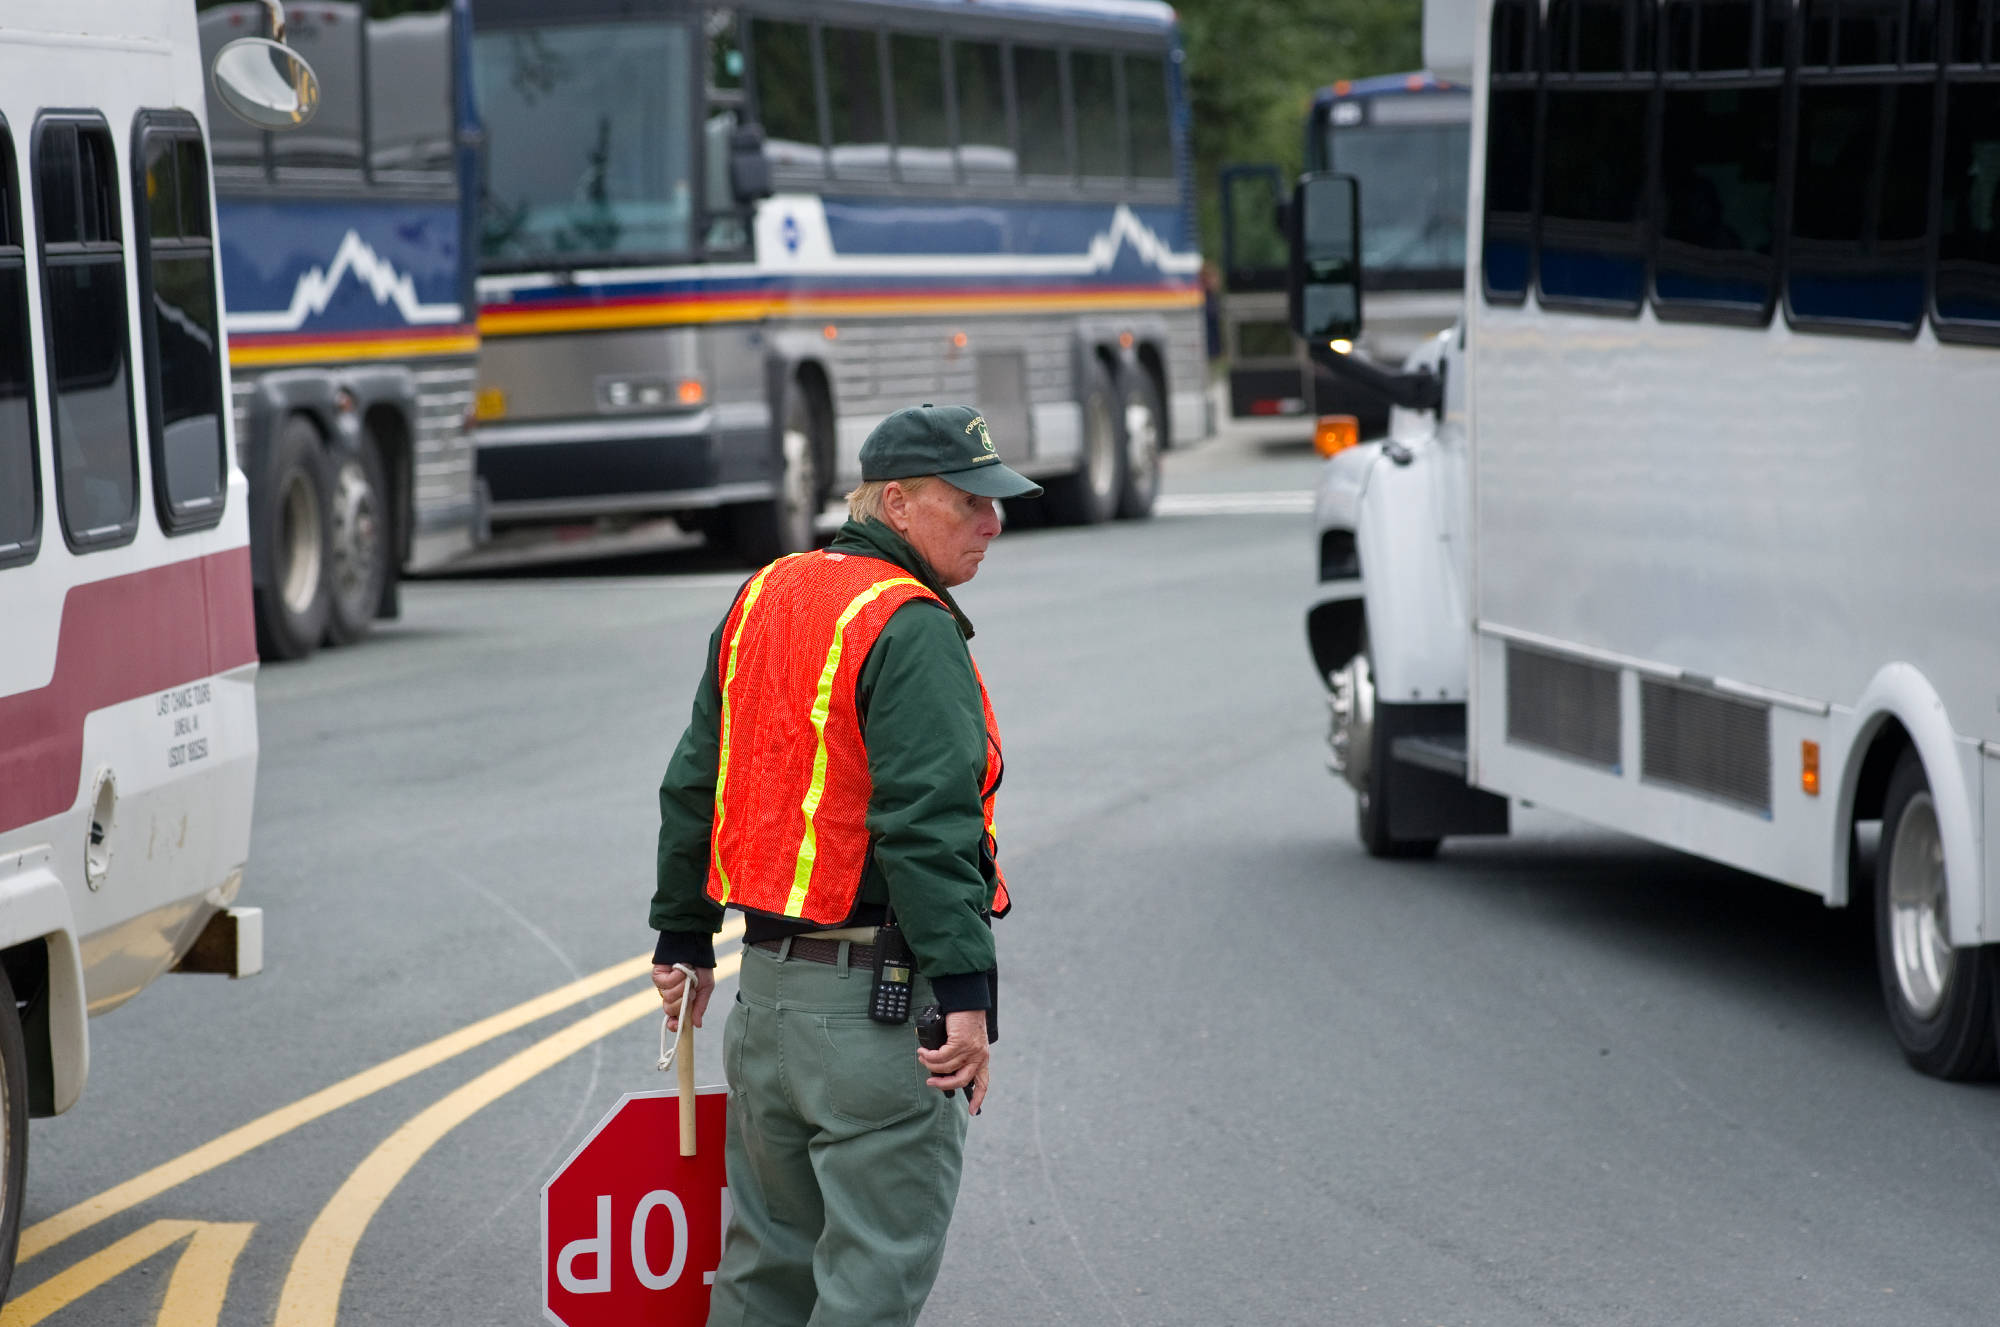 In this August 2013 file photo, Jack Hempstead of the U.S. Forest Service directs bus traffic at the Mendenhall Glacier Visitor Center. (Michael Penn | Juneau Empire file)